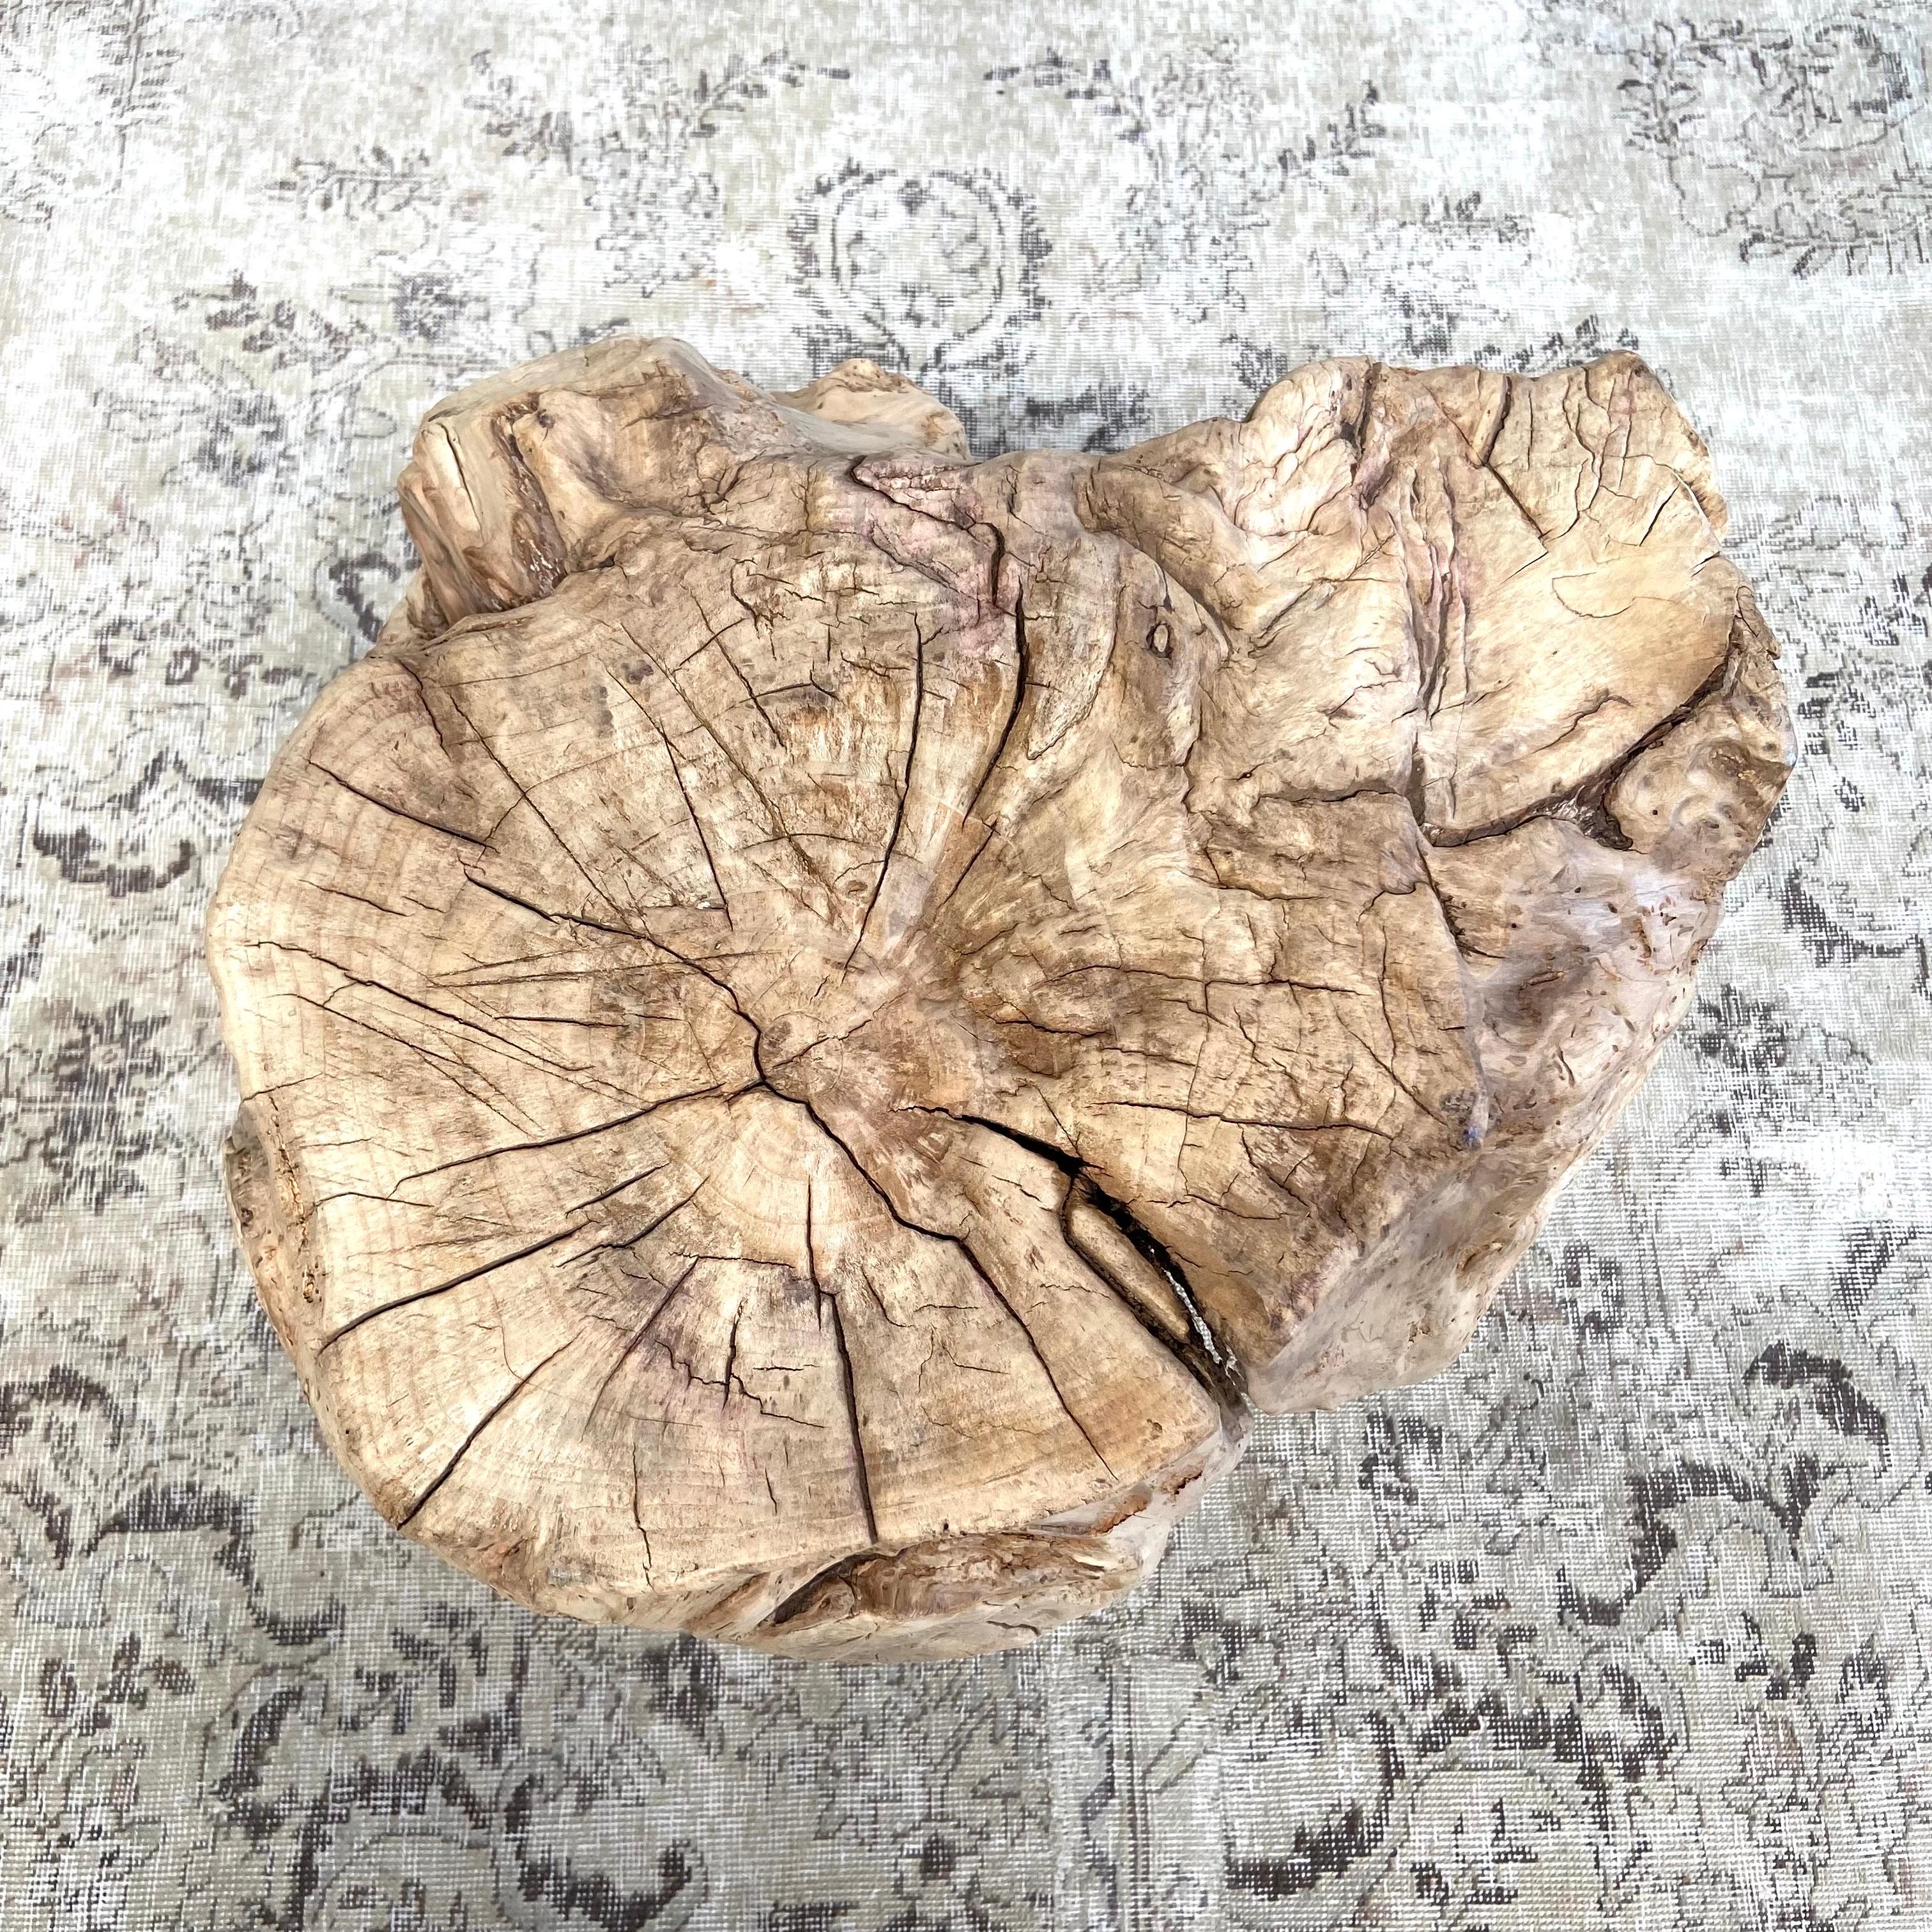 This solid stump slice was turned into a side table or stool. The solid thick top has a beautiful movement with unique characteristics. A natural live edge to show shape and form of what was.
Solid and sturdy, perfect earthy organic piece to add to